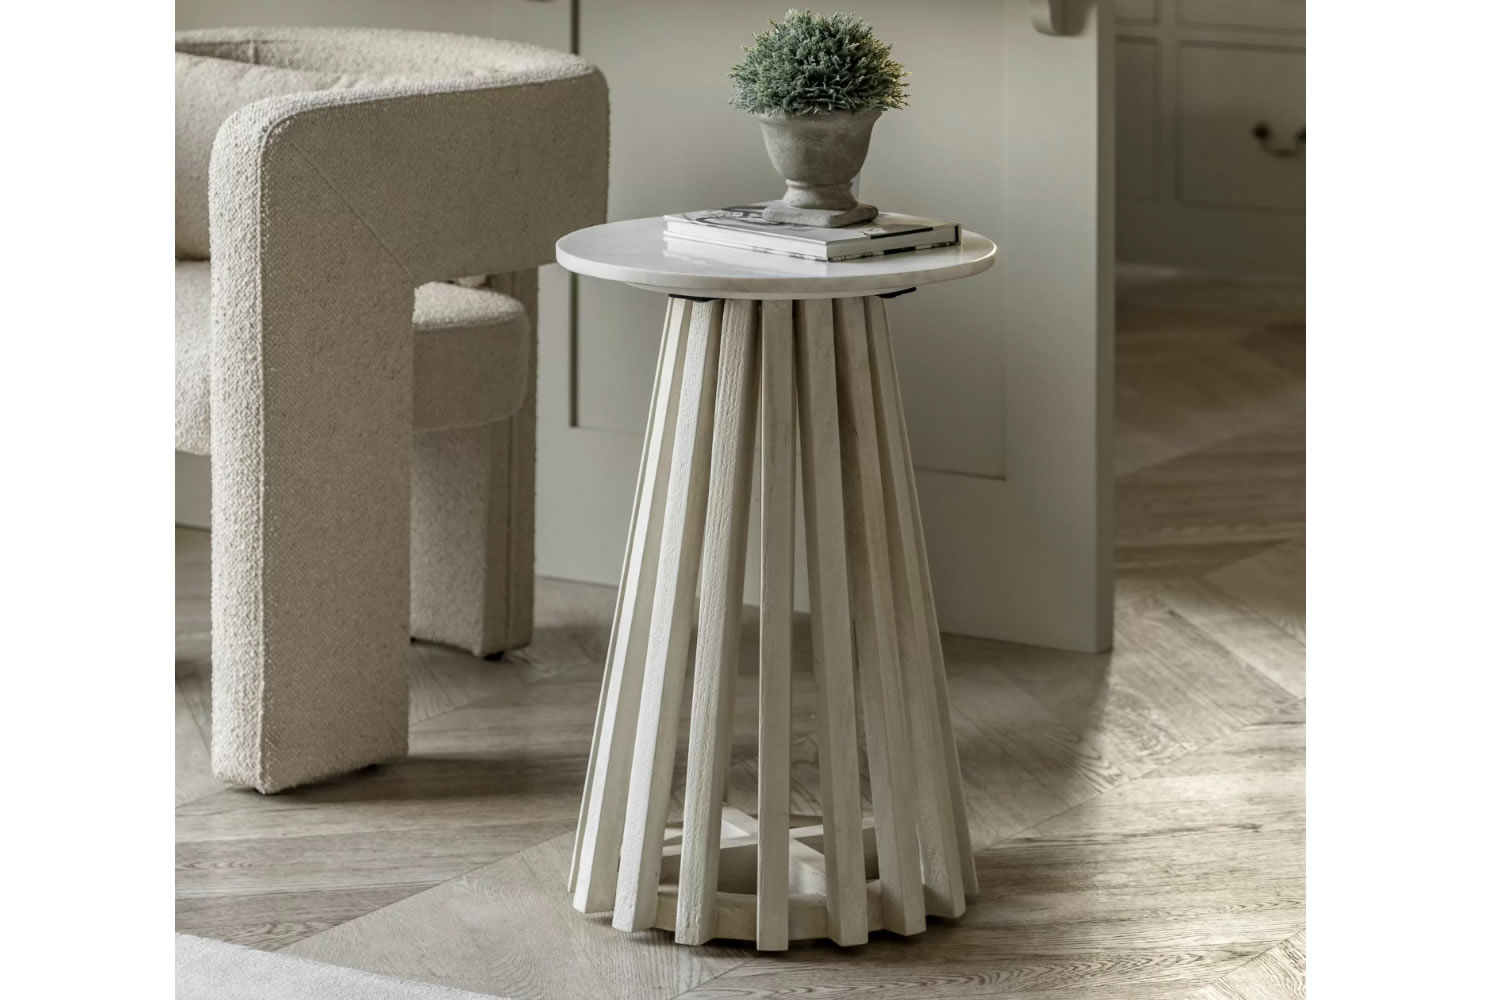 View Soho Side Table Solid Natural Mango Wood Chic Design White Indian Marble Top Easy Assembly Matching Pieces Available information